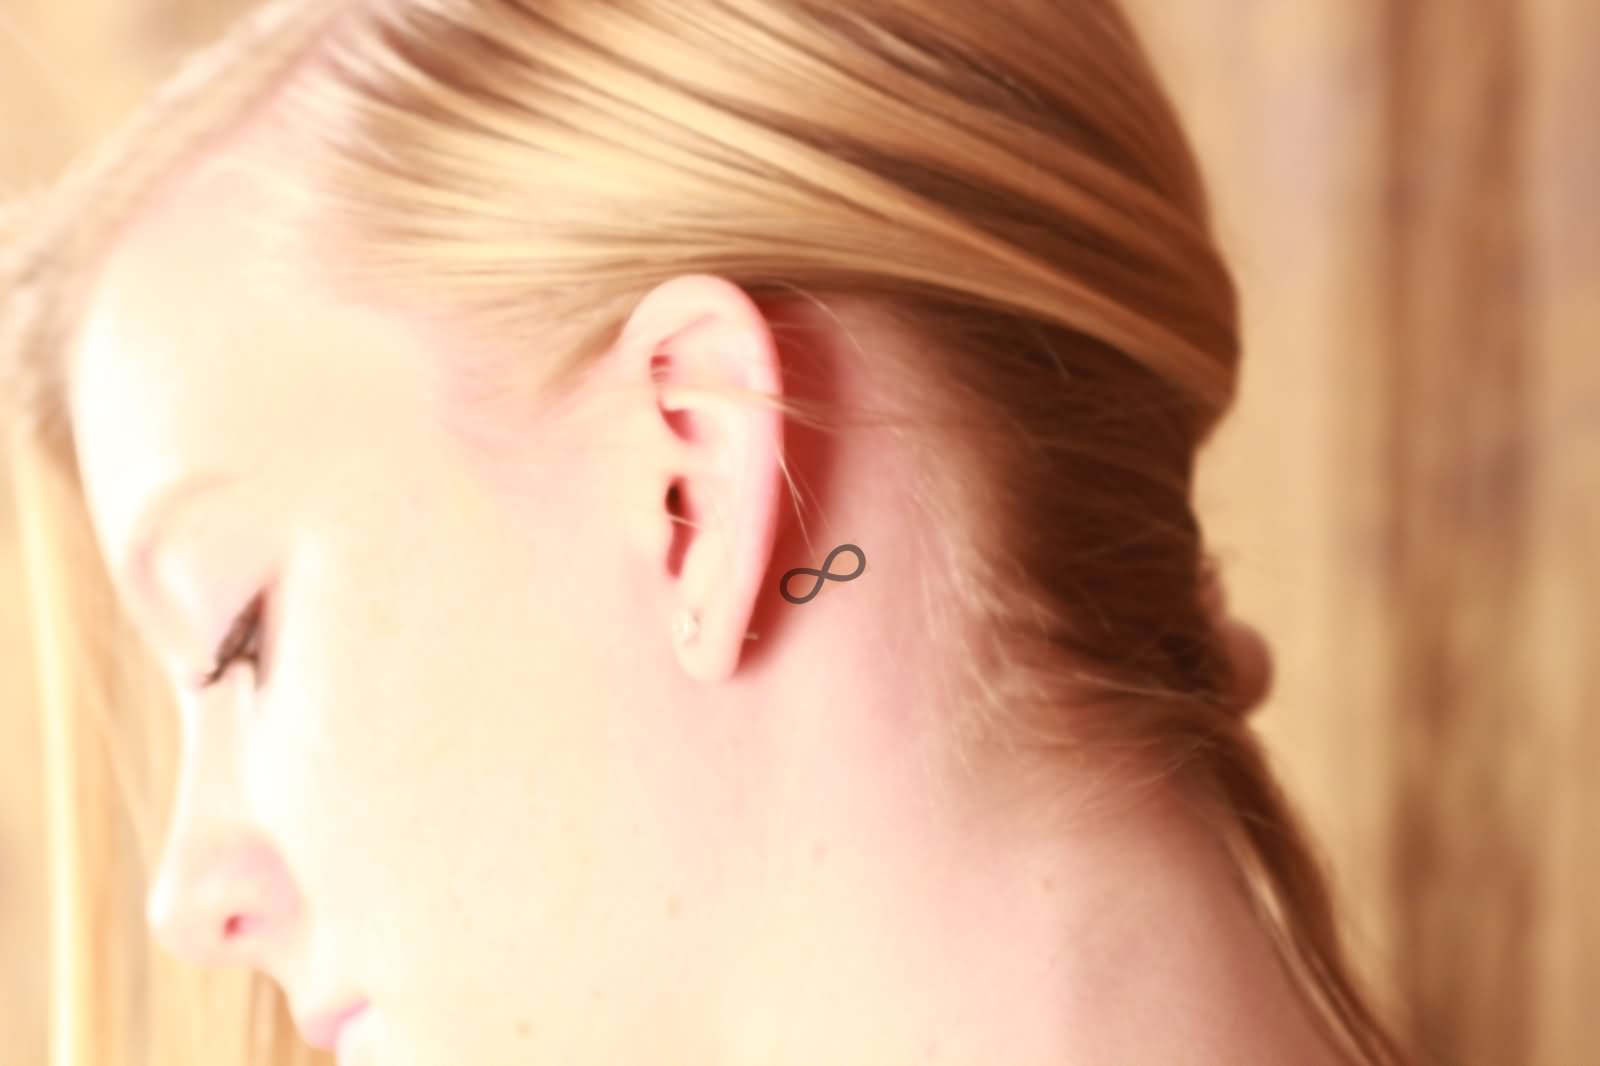 Black Infinity Tattoo On Girl Left Behind The Ear